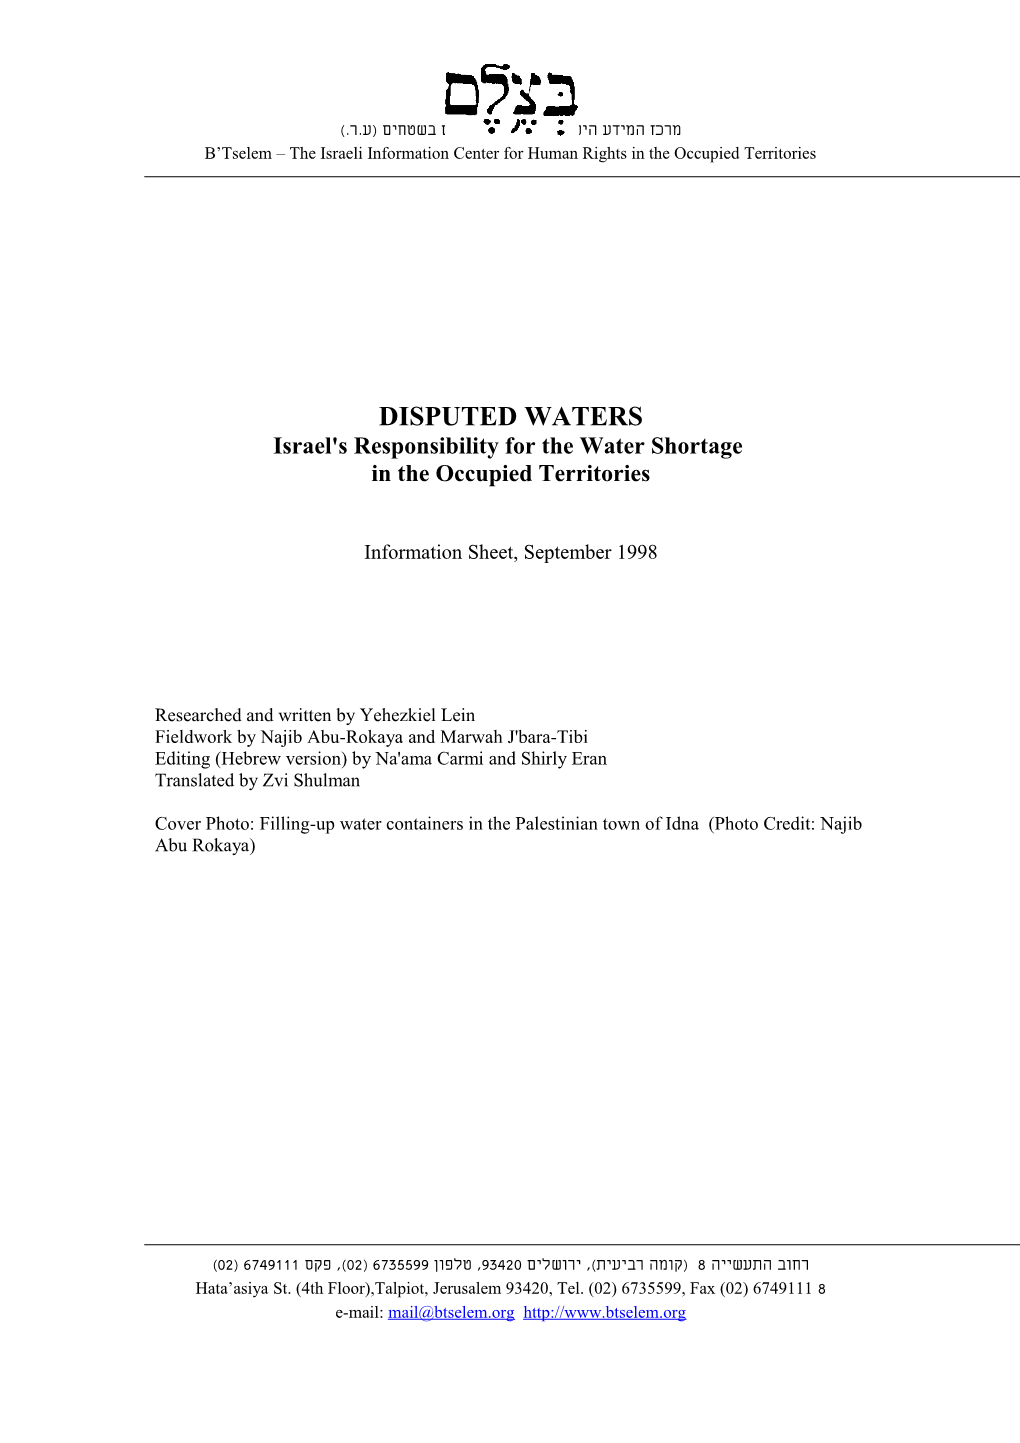 B'tselem - Disputed Waters: Israel's Responsibility for the Water Shortage in the Occupied